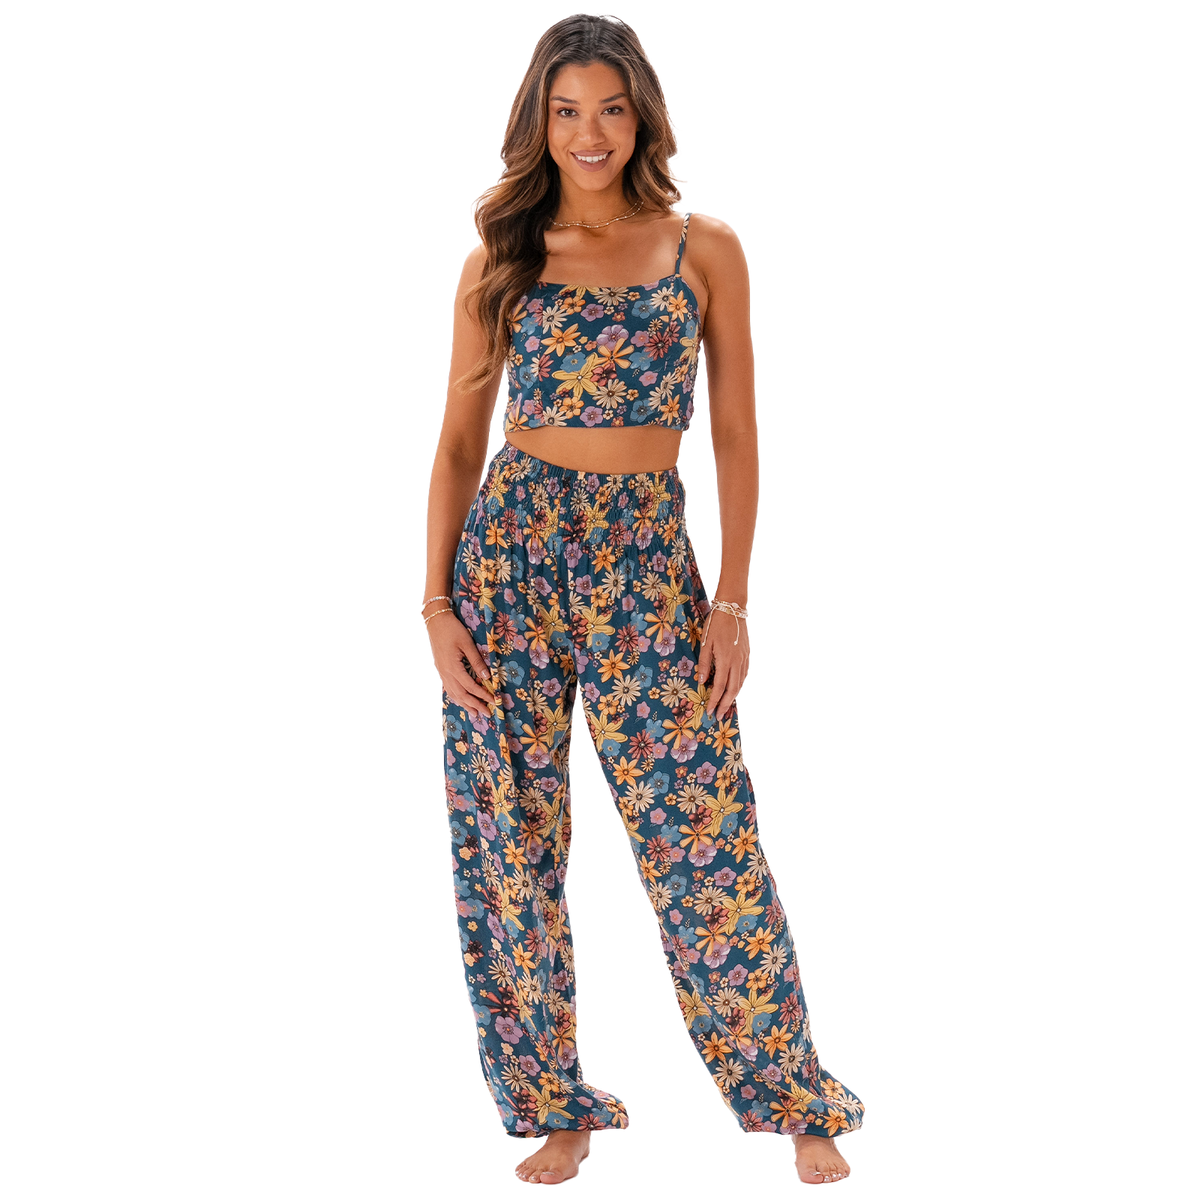 Model wearing blue, pink, orange and yellow floral print harem pants and a matching tank top